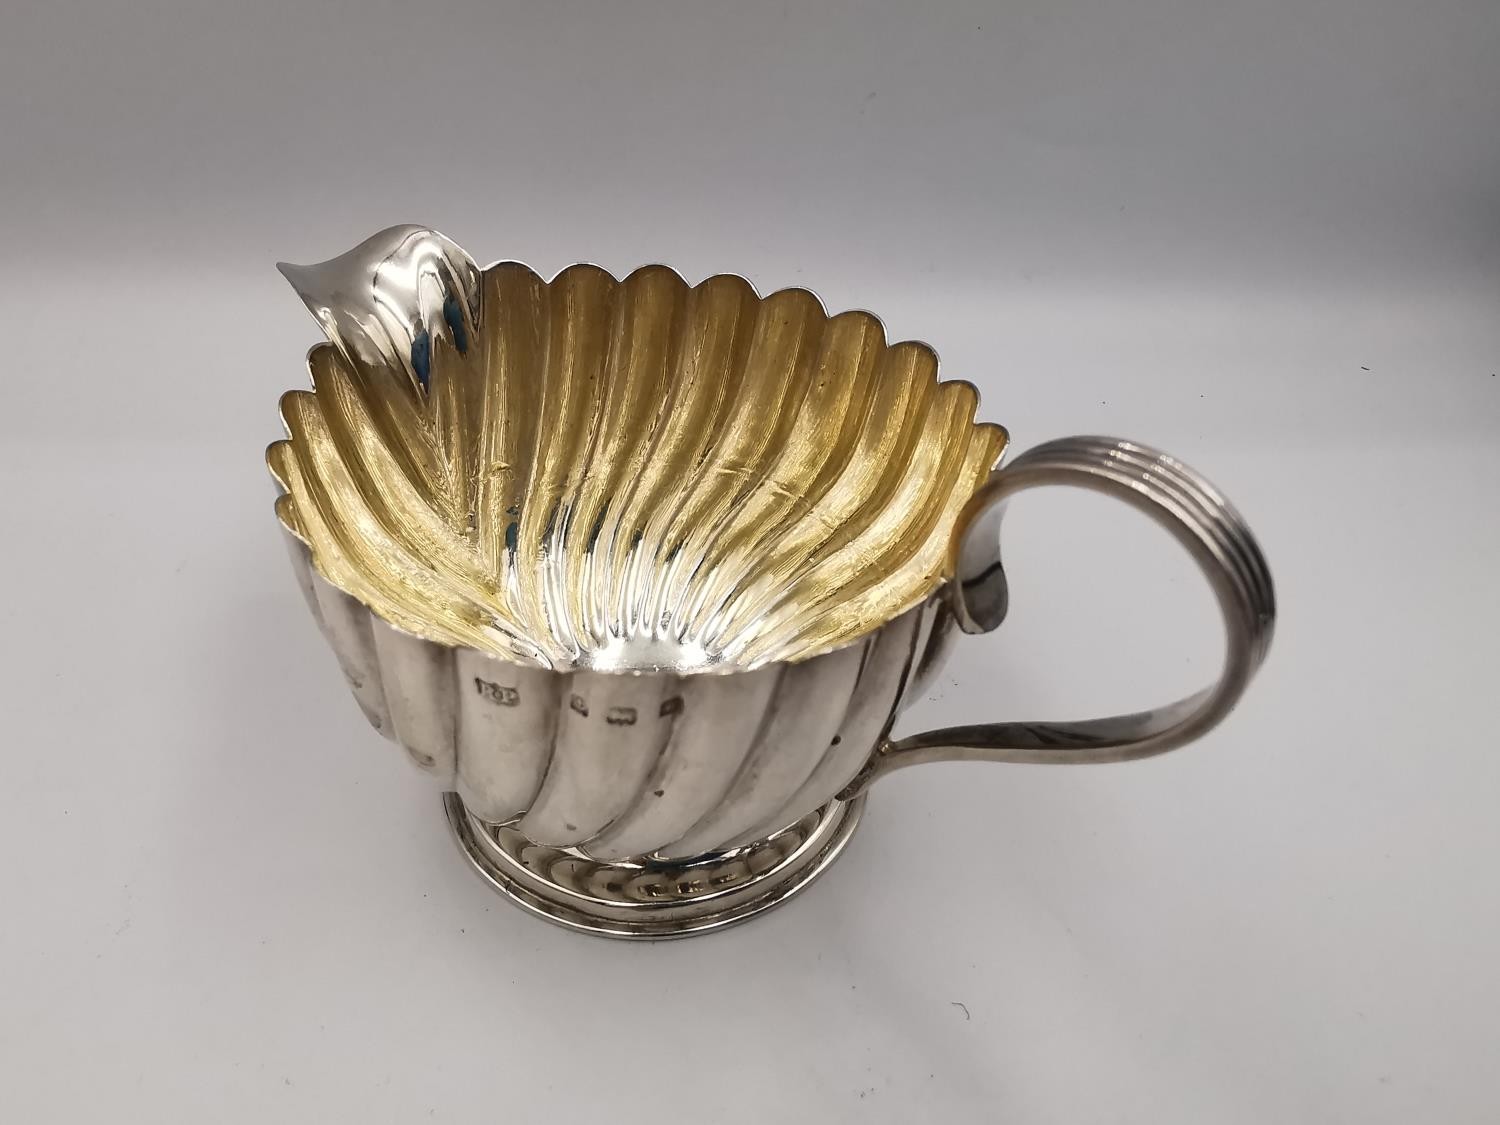 An Edwardian sterling silver sauce boat by Joseph Rodgers & Sons (handle broken) along with a - Image 11 of 14